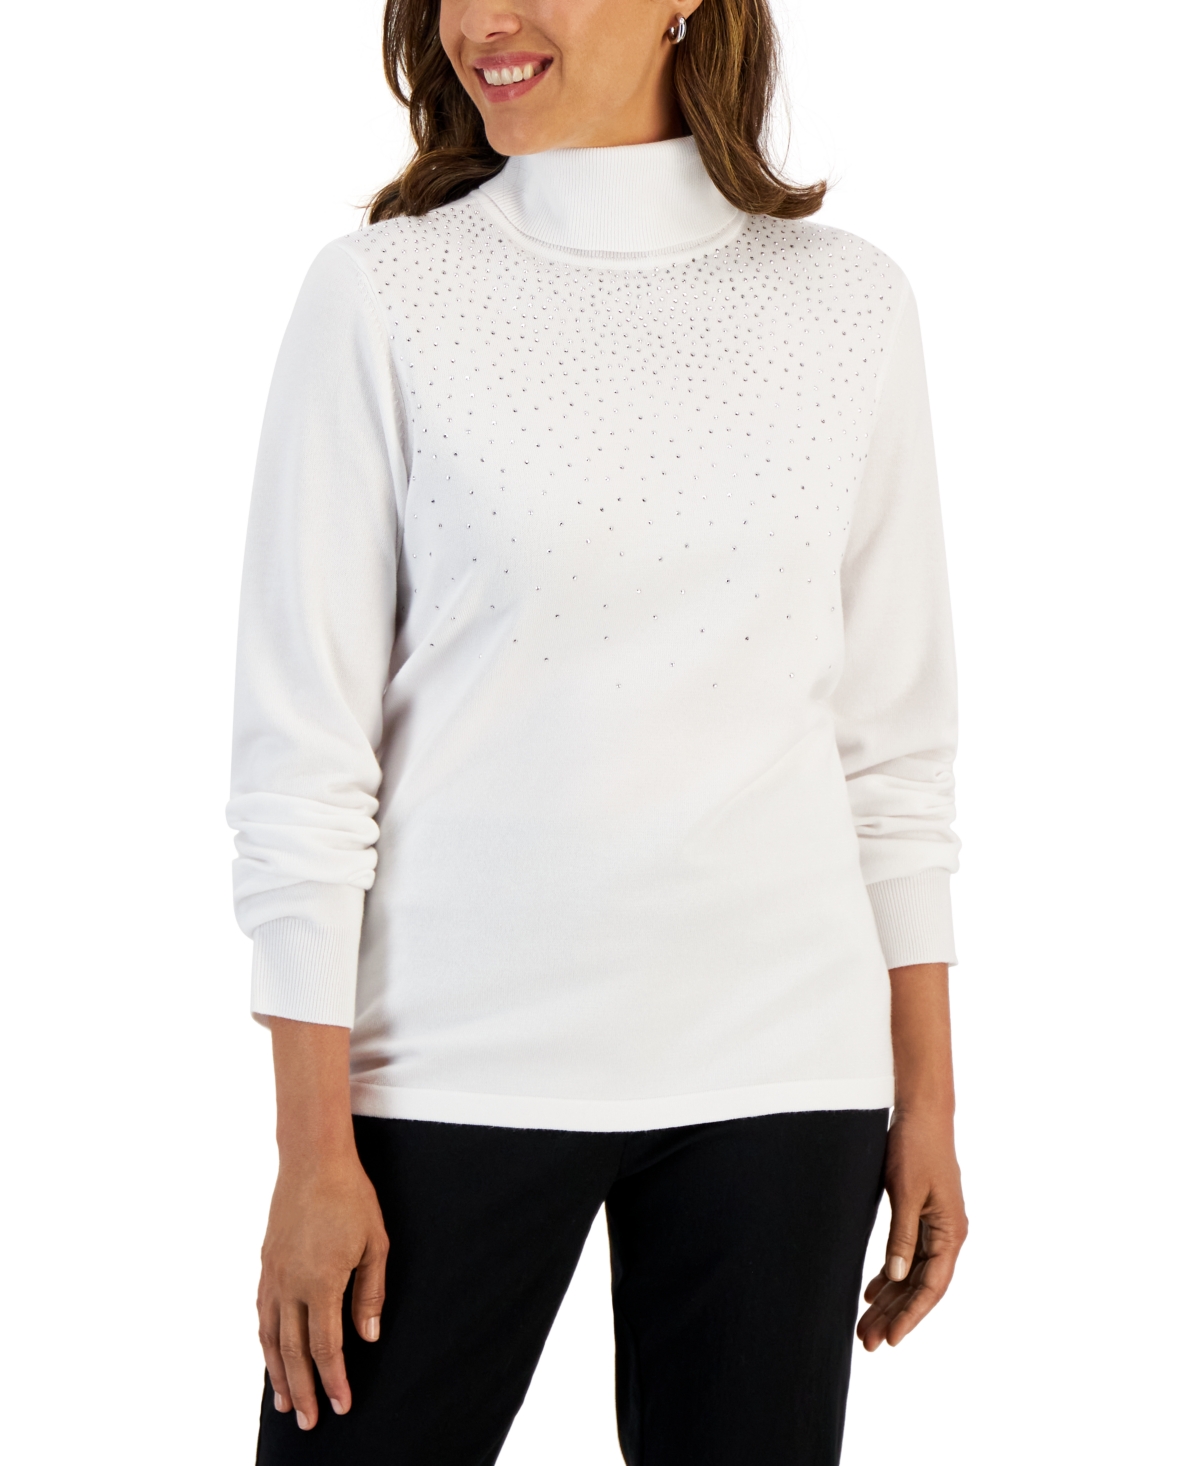 Women's Embellished Turtleneck Sweater, Created for Macy's - Winter White